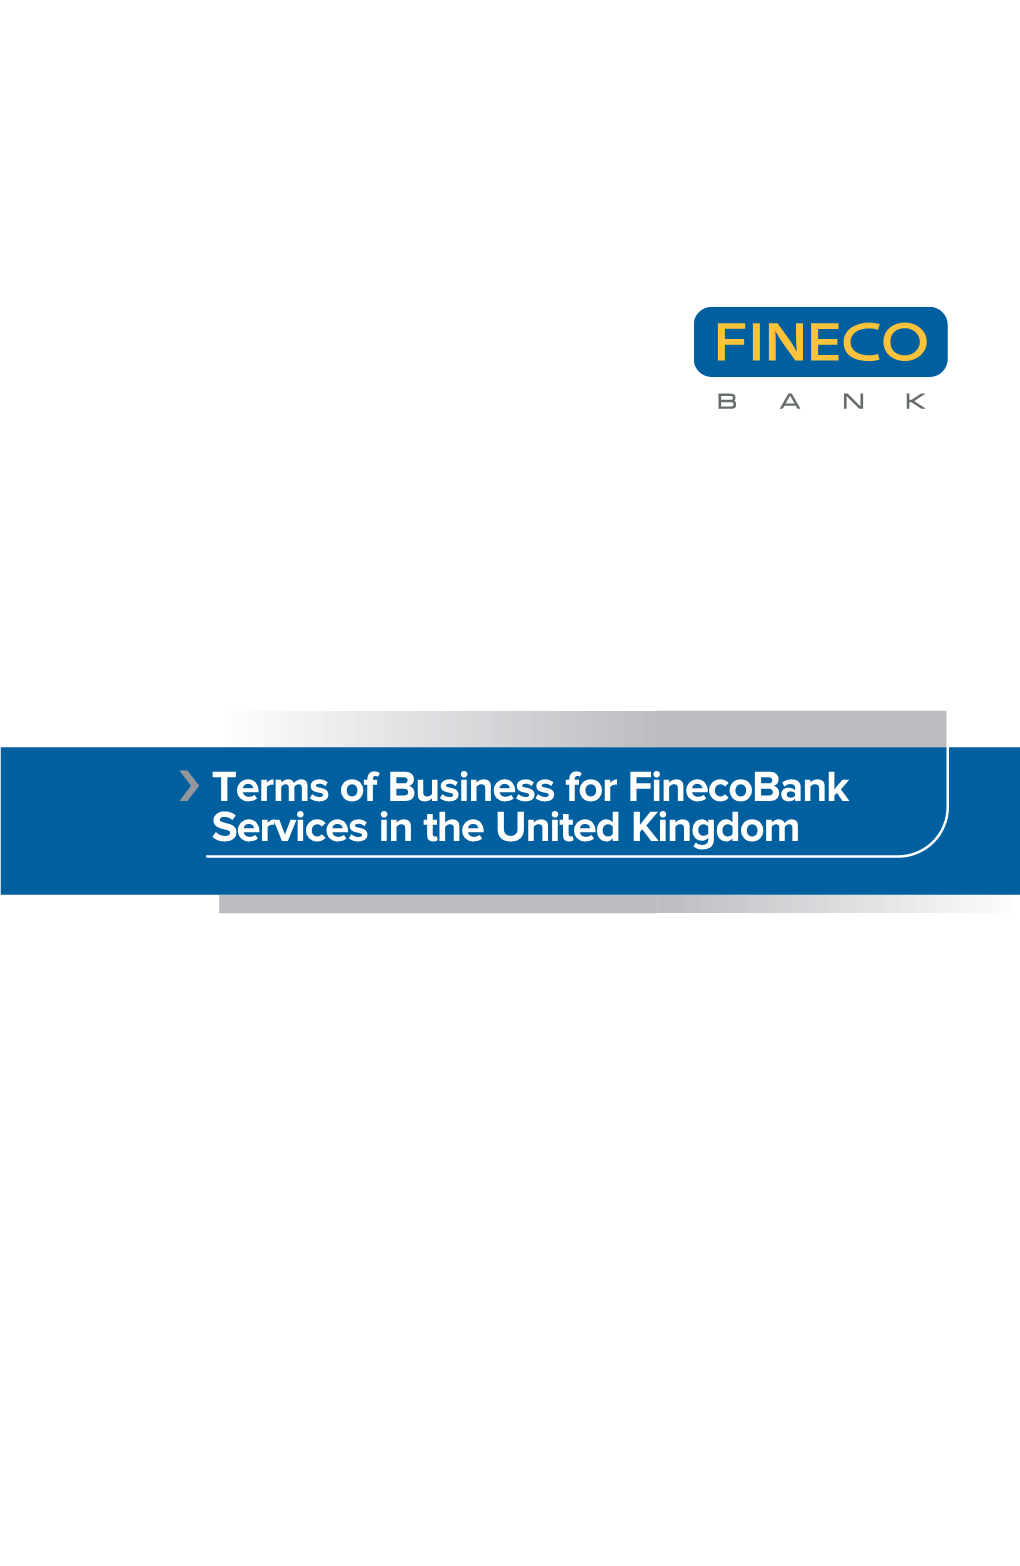 Terms of Business for Finecobank Services in the United Kingdom